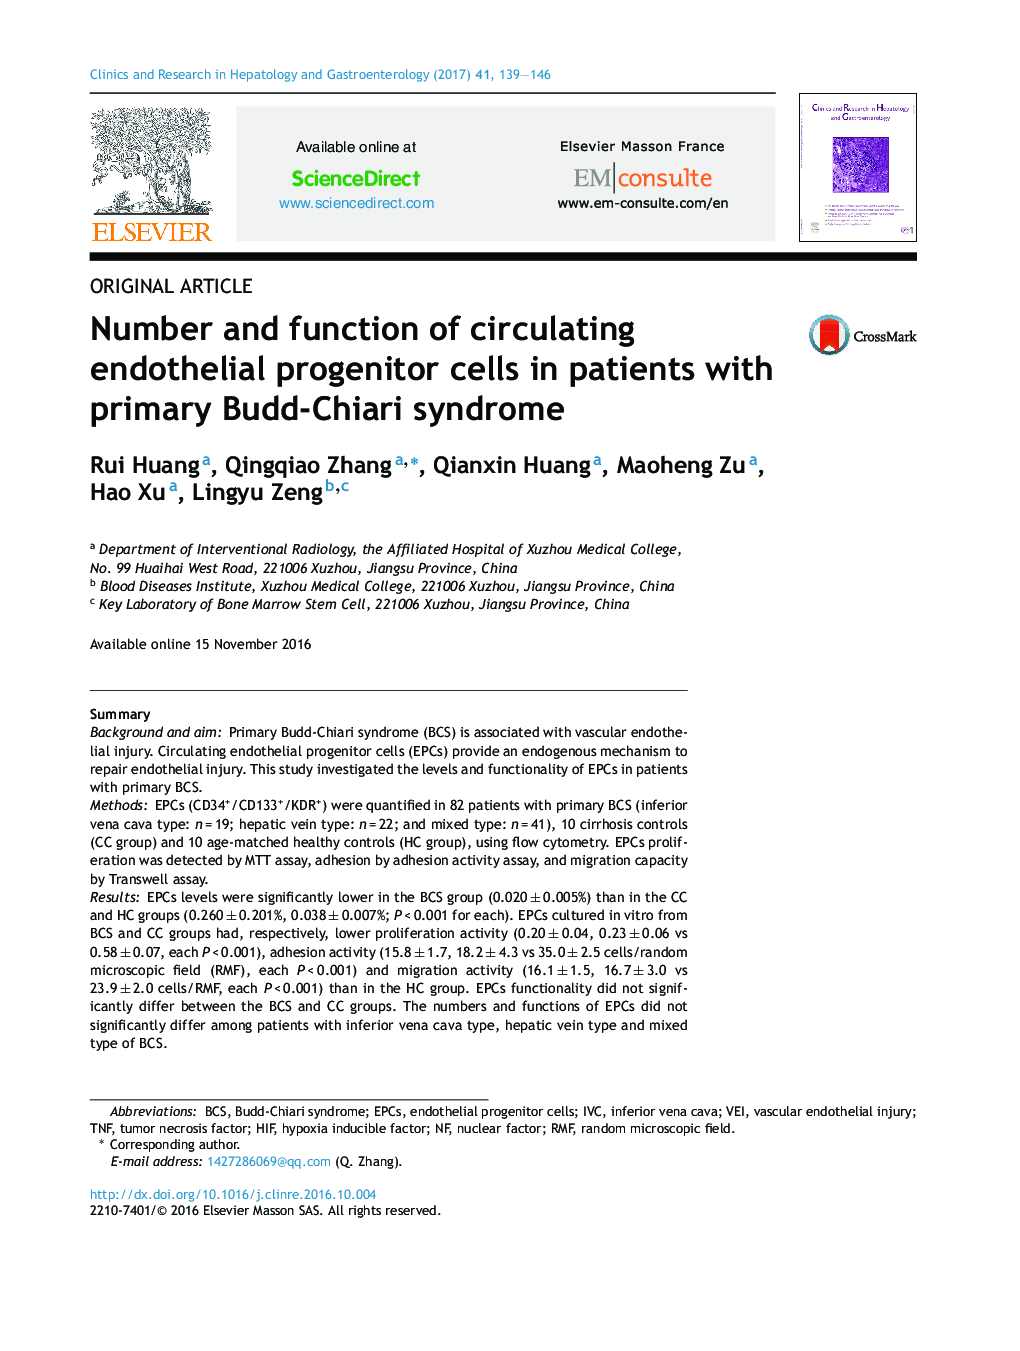 Number and function of circulating endothelial progenitor cells in patients with primary Budd-Chiari syndrome